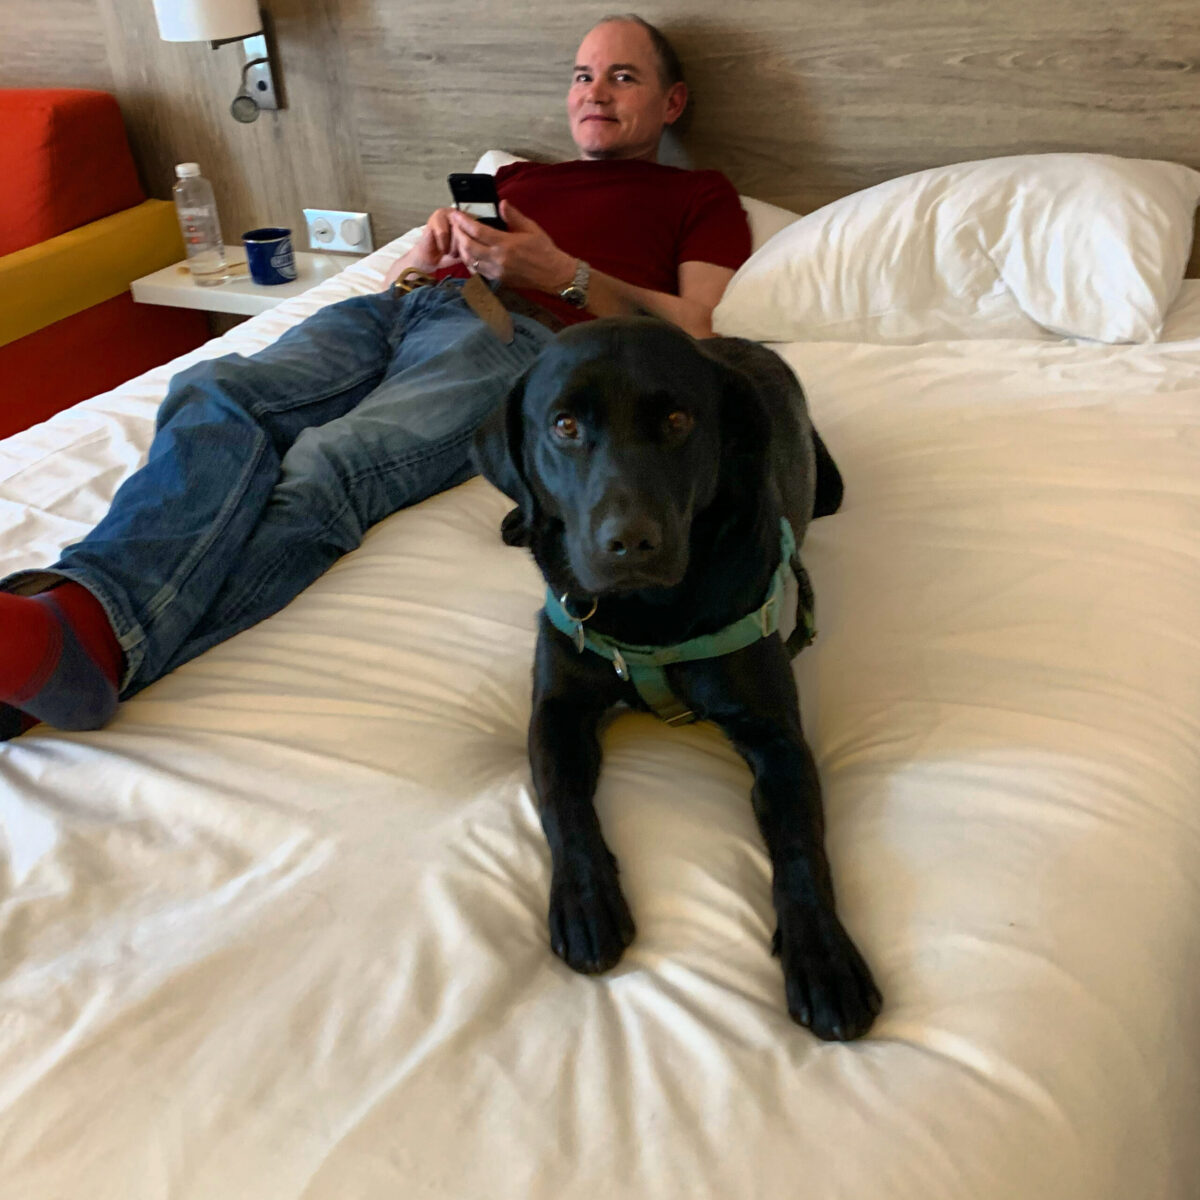 At the Ibis Styles in Chaumont. Ozzy seemed very comfy on the bed. The Drive to Our Summer Holiday on Covid-19 Times.